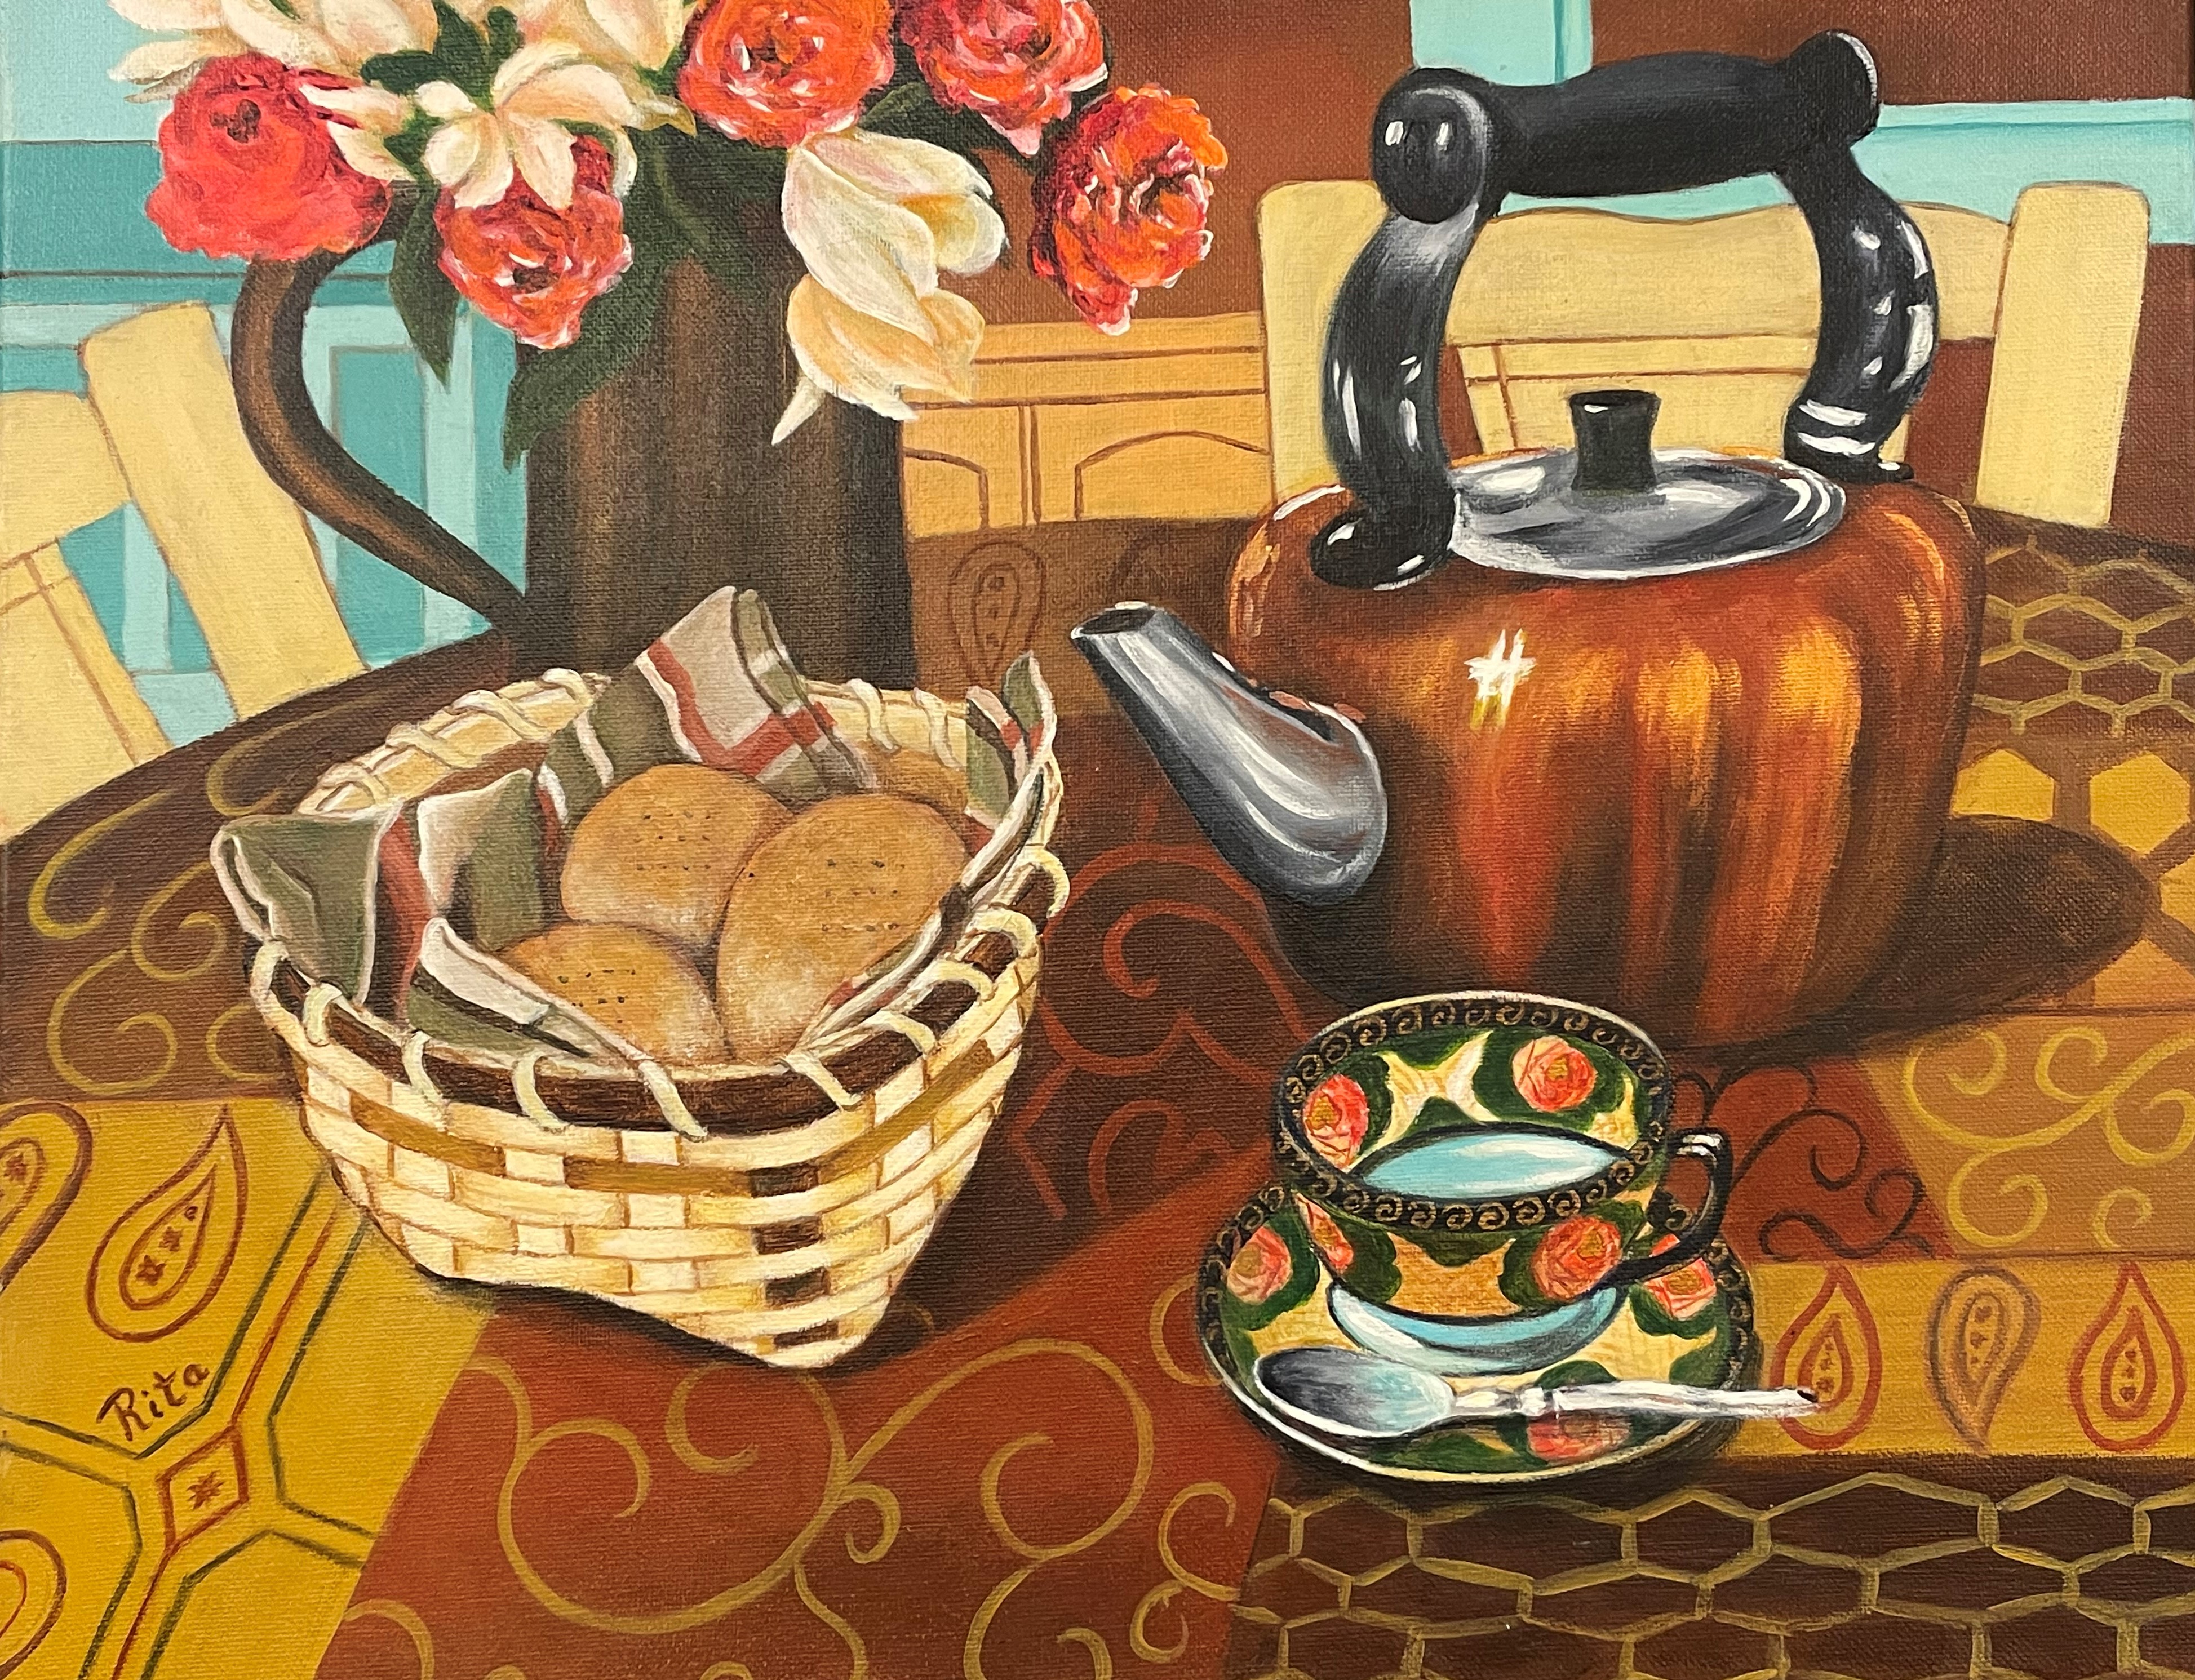 Painting: Thé acadien by Rita Arsenault with flowers, a bread basket, a teacup and a kettle on colourful tablecloth